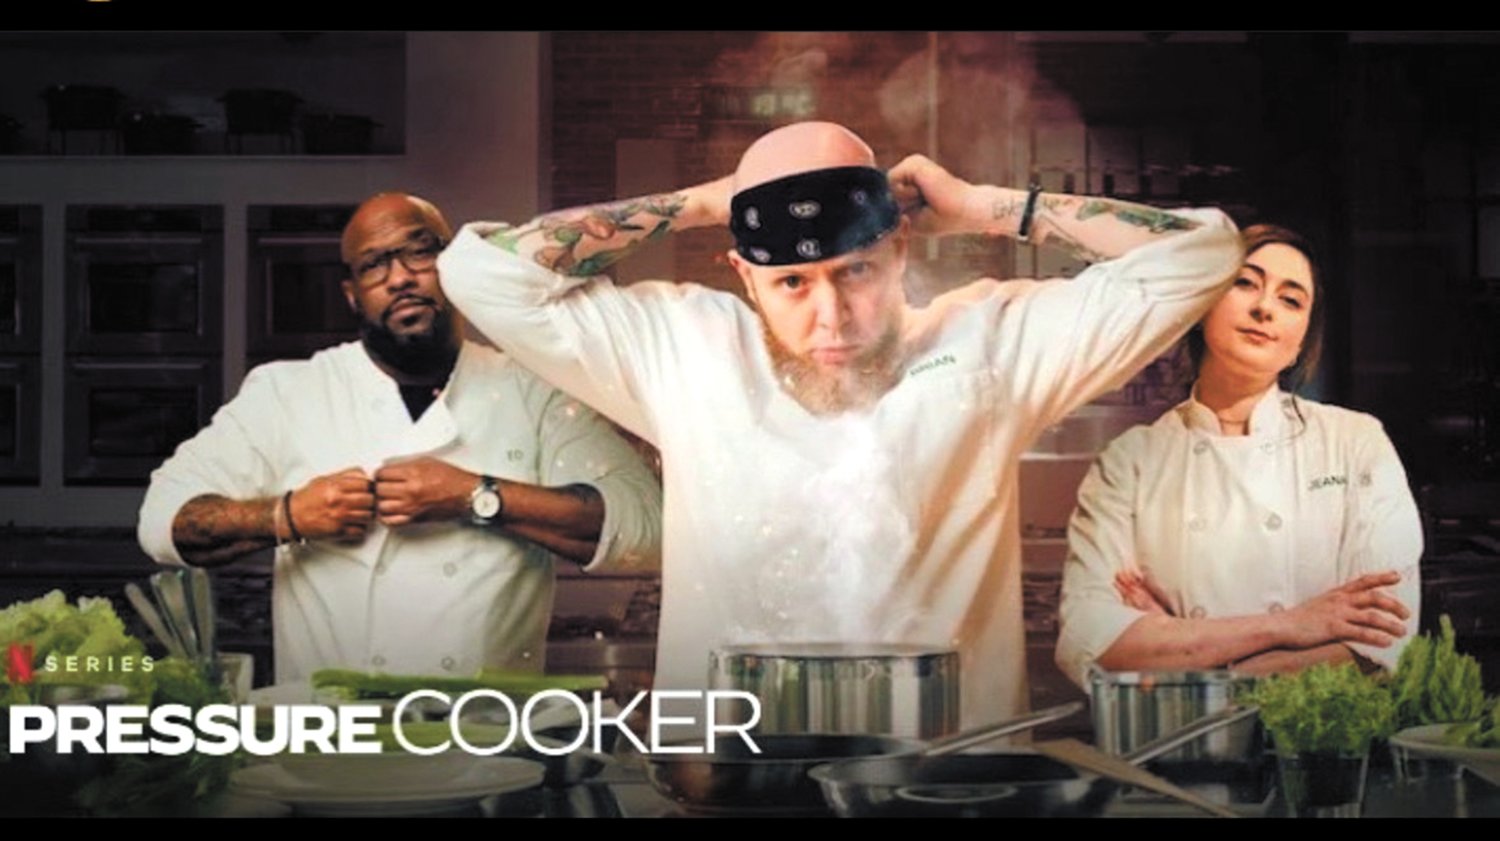 NEW NETFLIX SERIES: Pressure Cooker dropped on Netflix on Jan. 6. The show has been in the streaming service’s Top 10 shows last week and has received positive responses. (Submitted photo)